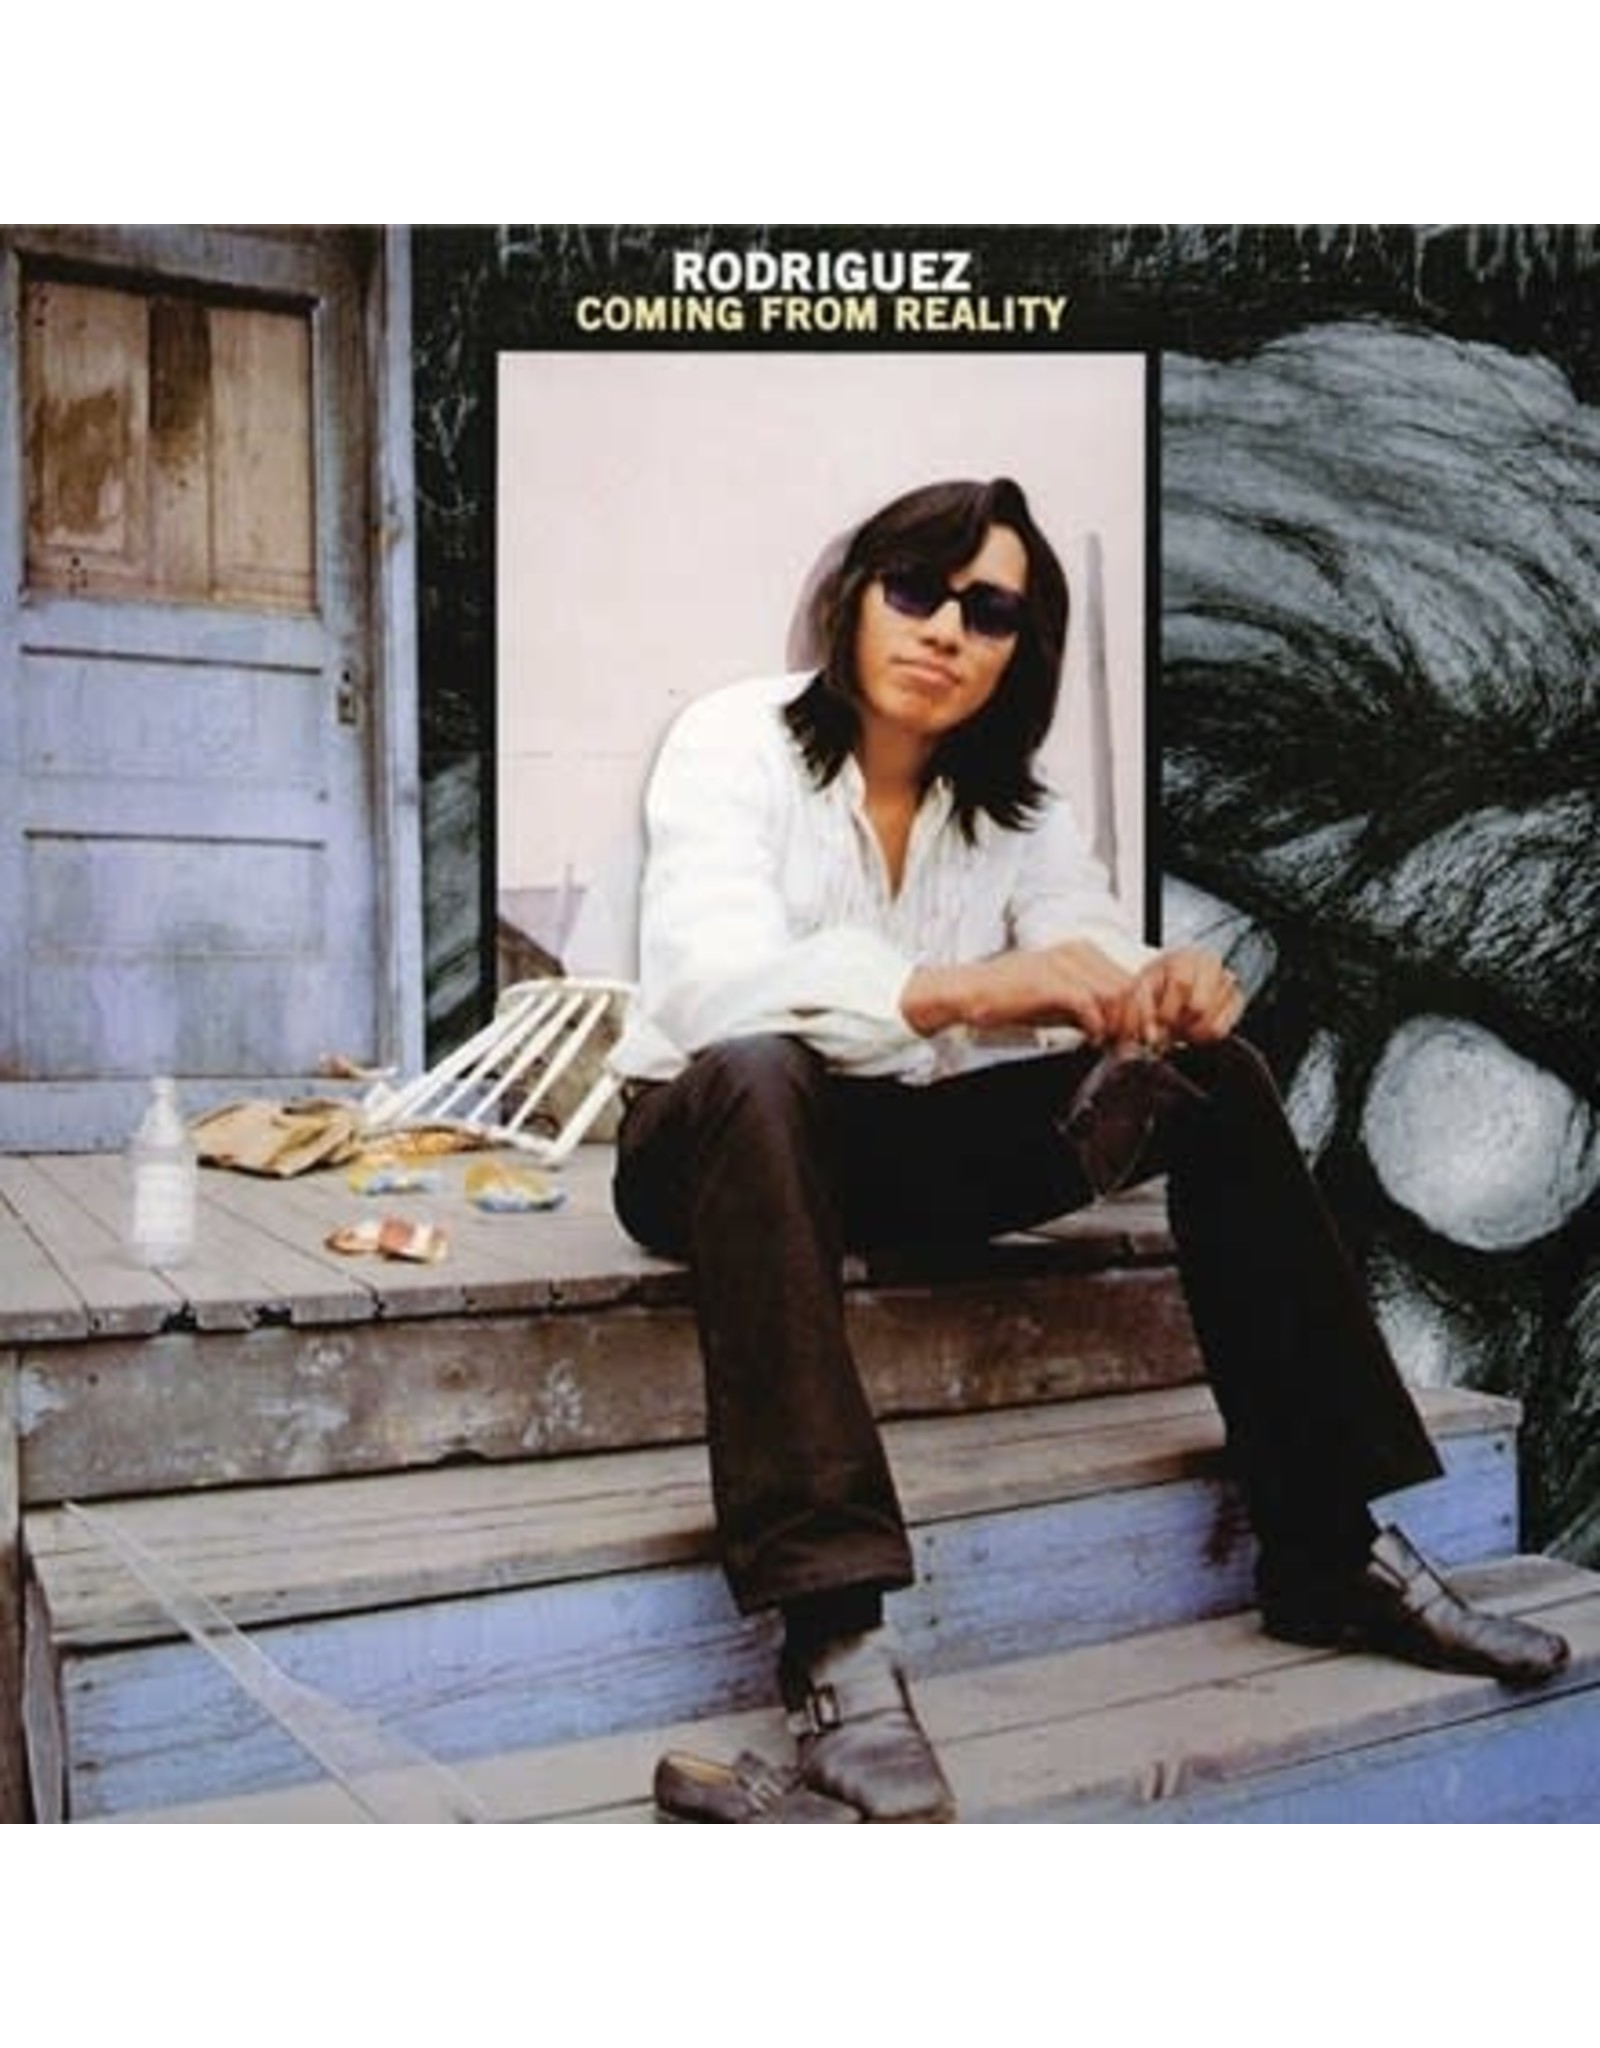 Universal Rodriguez: Coming From Reality LP